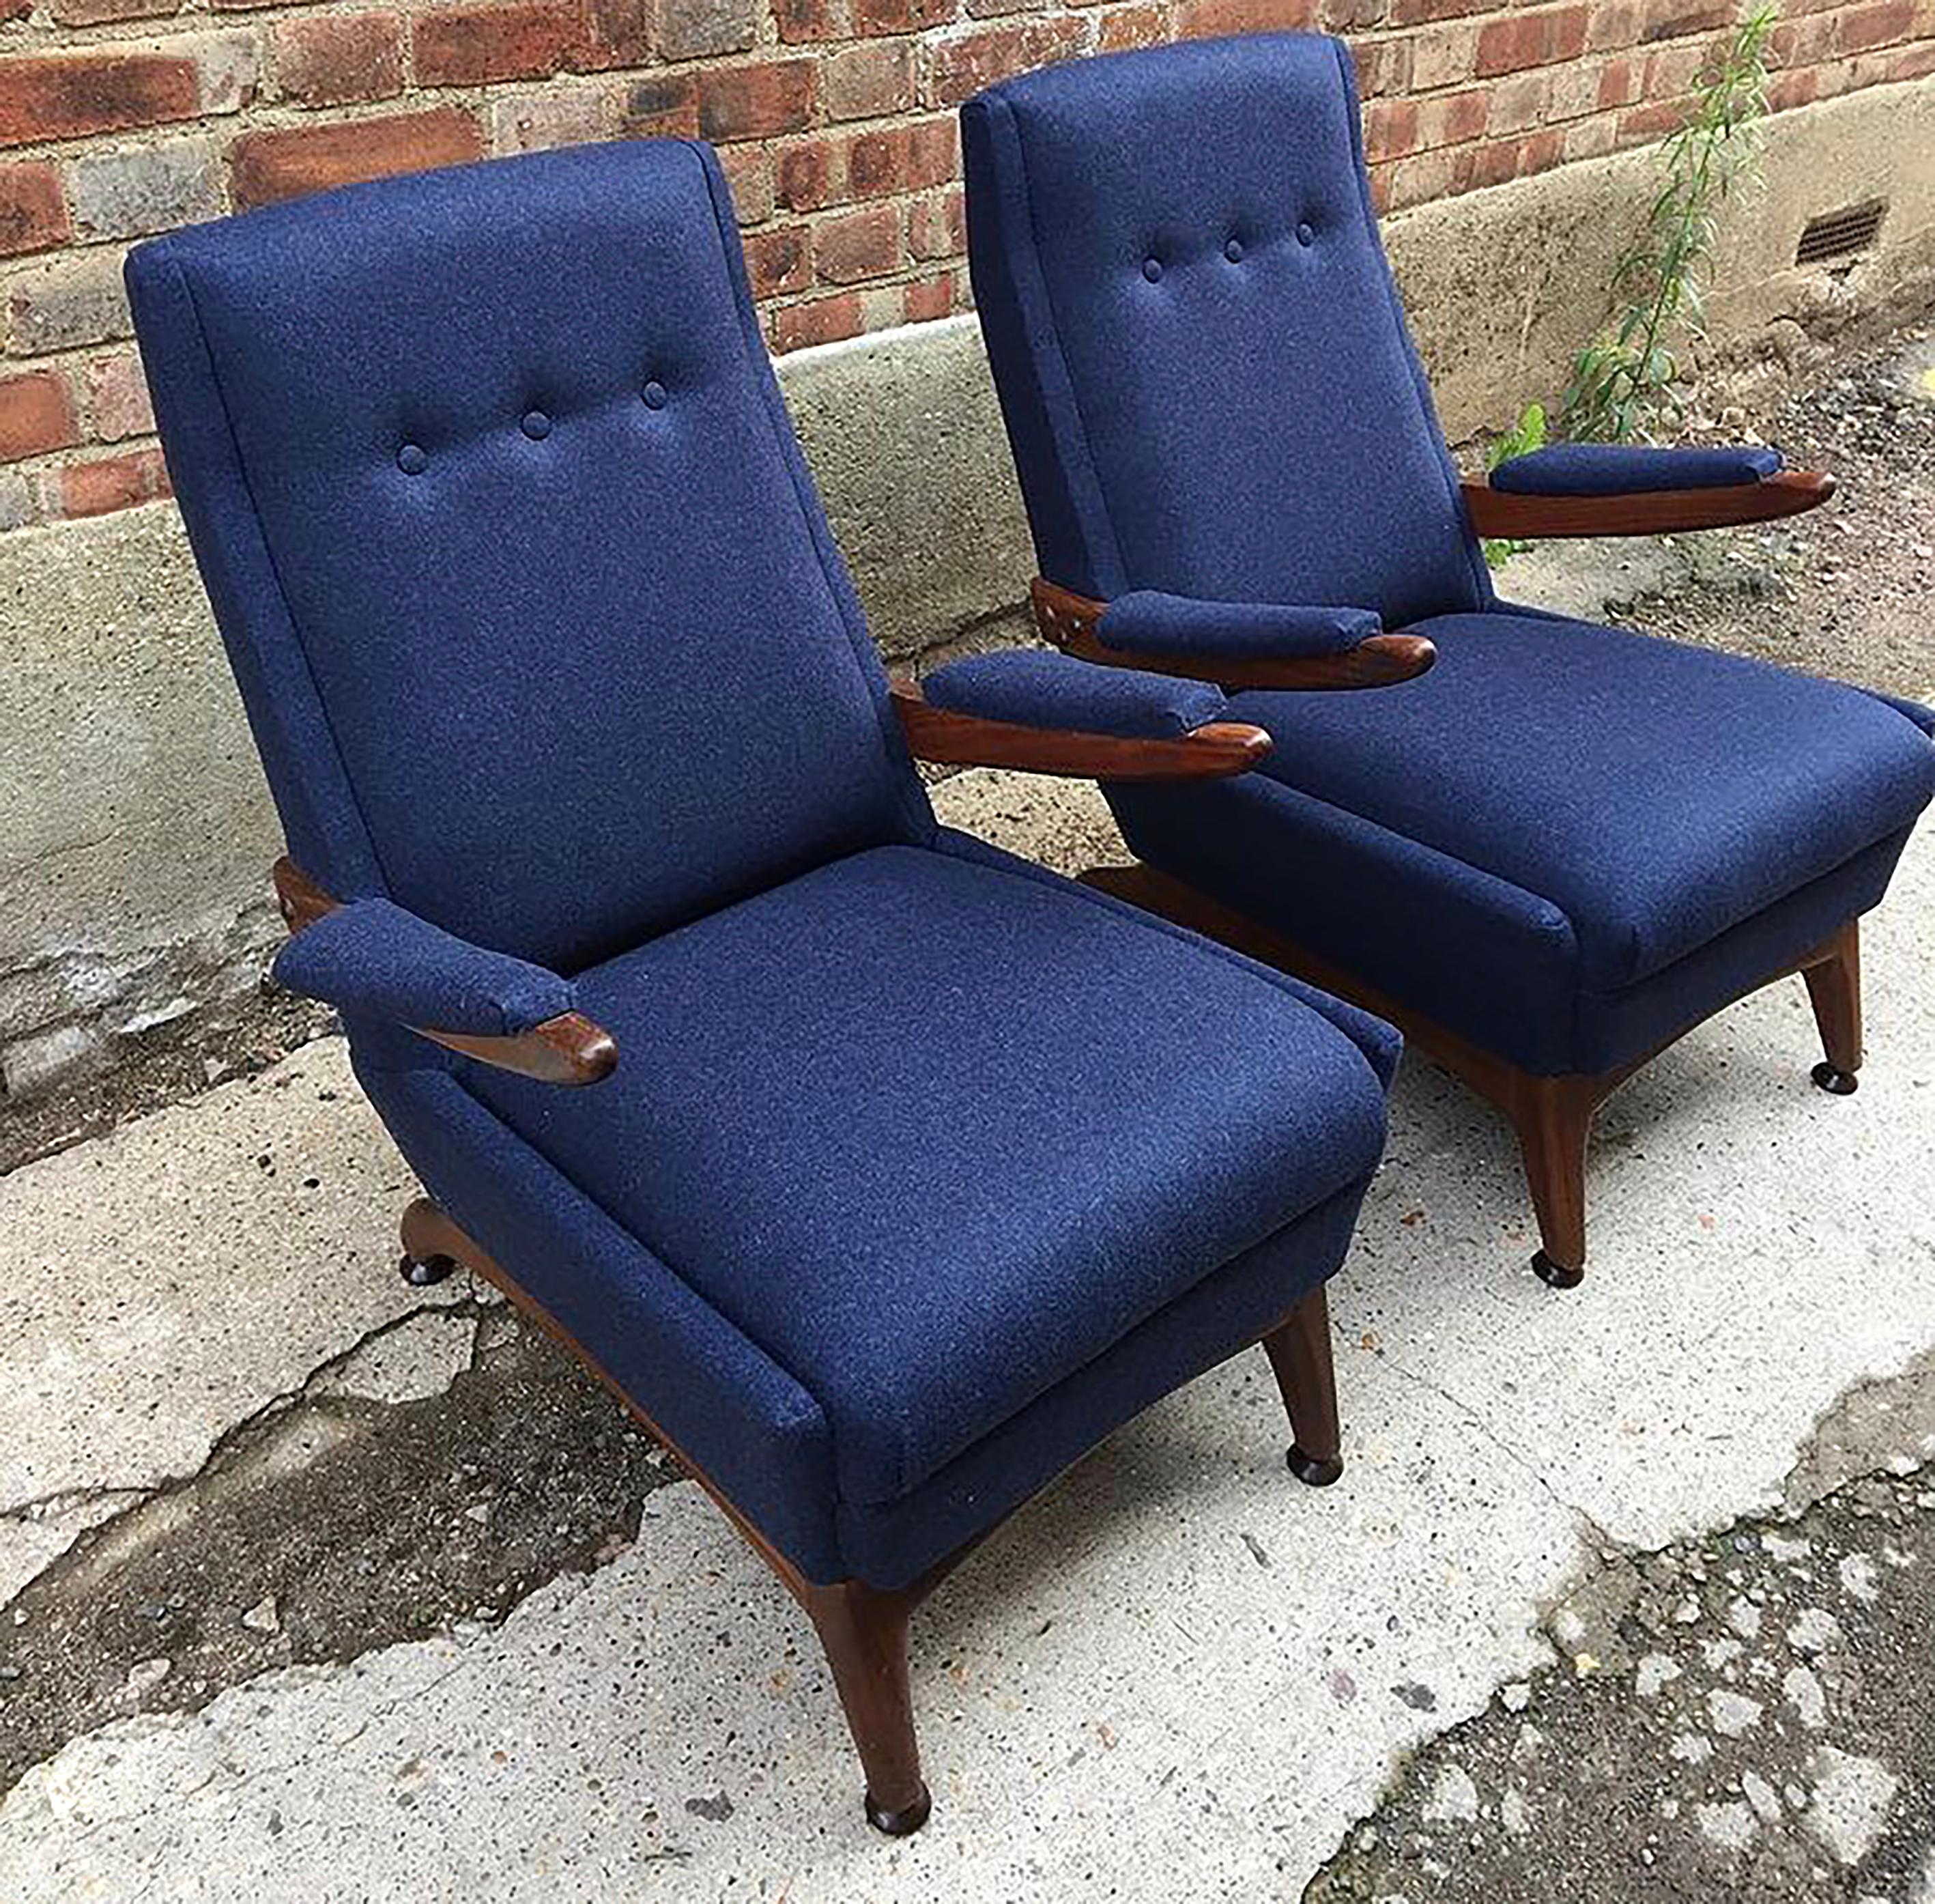 Pair of lovely wooden armchairs manufactured in the 1960s. The teak frame, polished in Danish oil, is beautifully hand carved with wonderful elegant curves. Incredibly comfortable, the low seat height makes these chairs ideal for lounging. 

Please